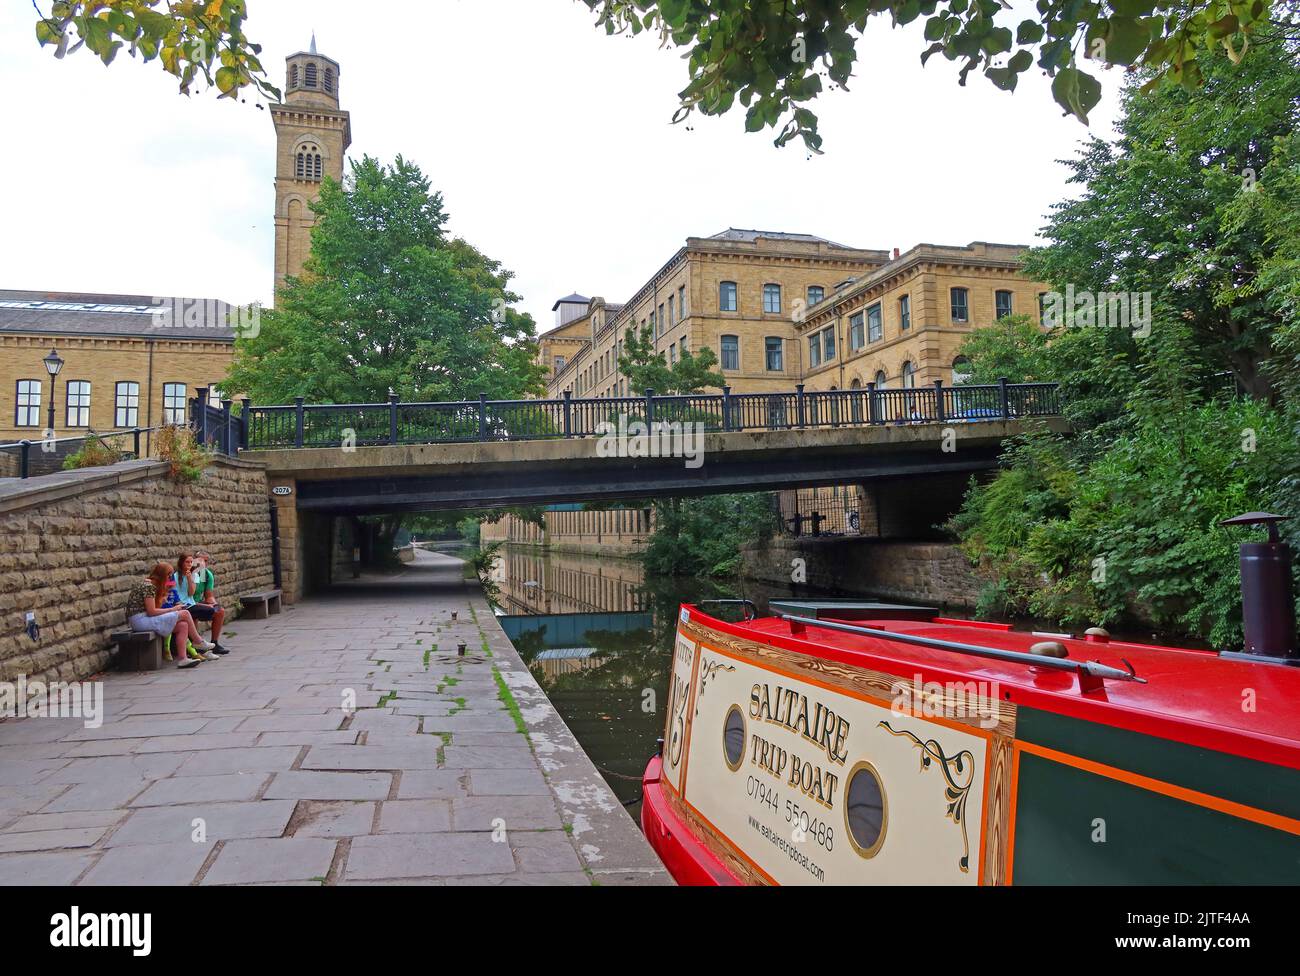 Titus NO3 Saltaire Trip Boat, Leeds Liverpool Canal, Wuth Mills at Saltaire, Shipley, West Yorkshire, Angleterre, Royaume-Uni, BD98 8AA Banque D'Images